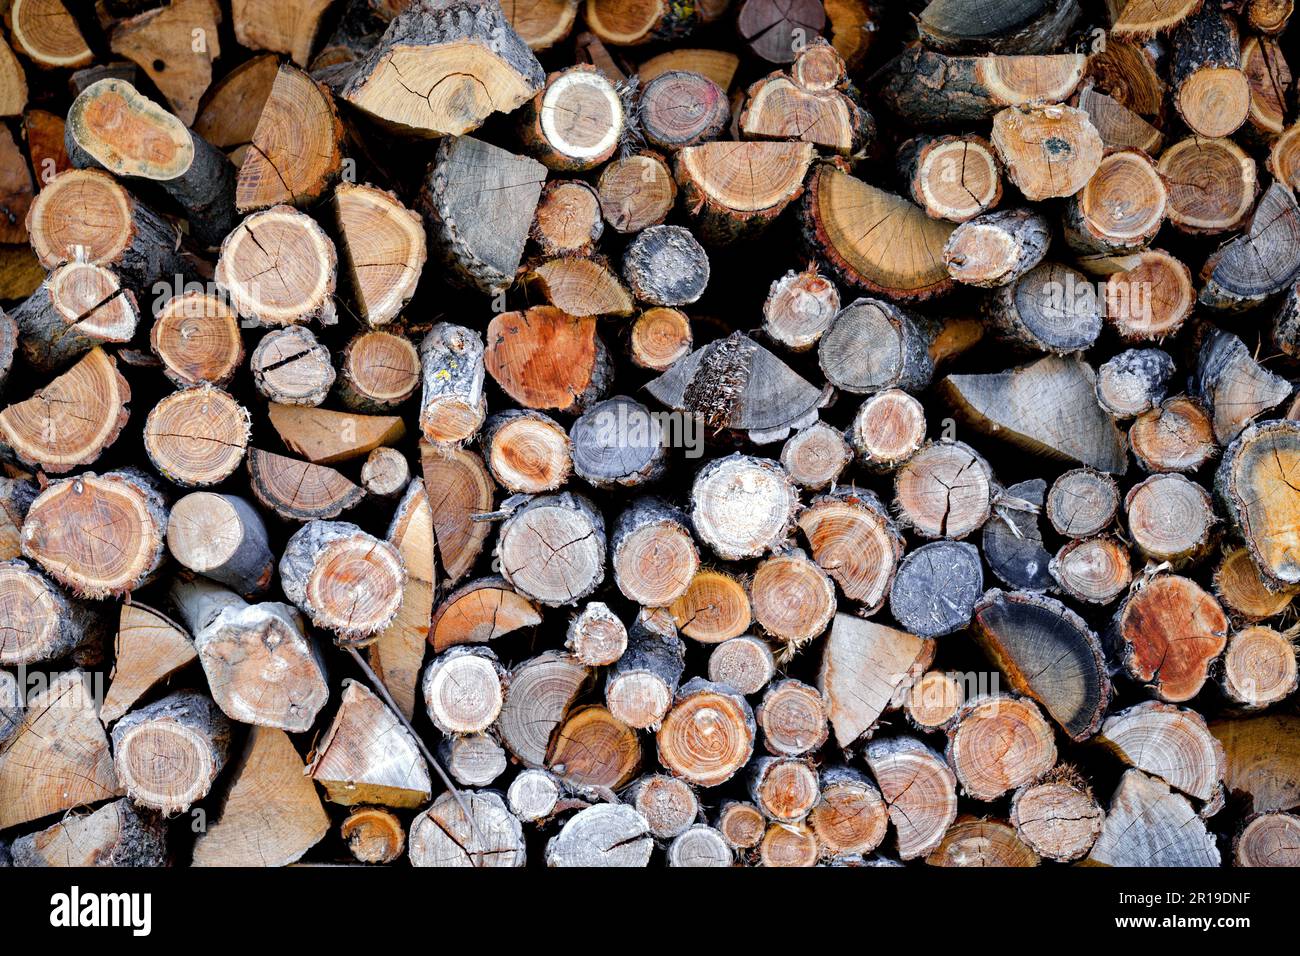 Wood rack, wood storage. Chopped wood for stove heating. Various colored tree trunks stacked in a wood shed. Chopped wood logs, to be used in a stove. Stock Photo